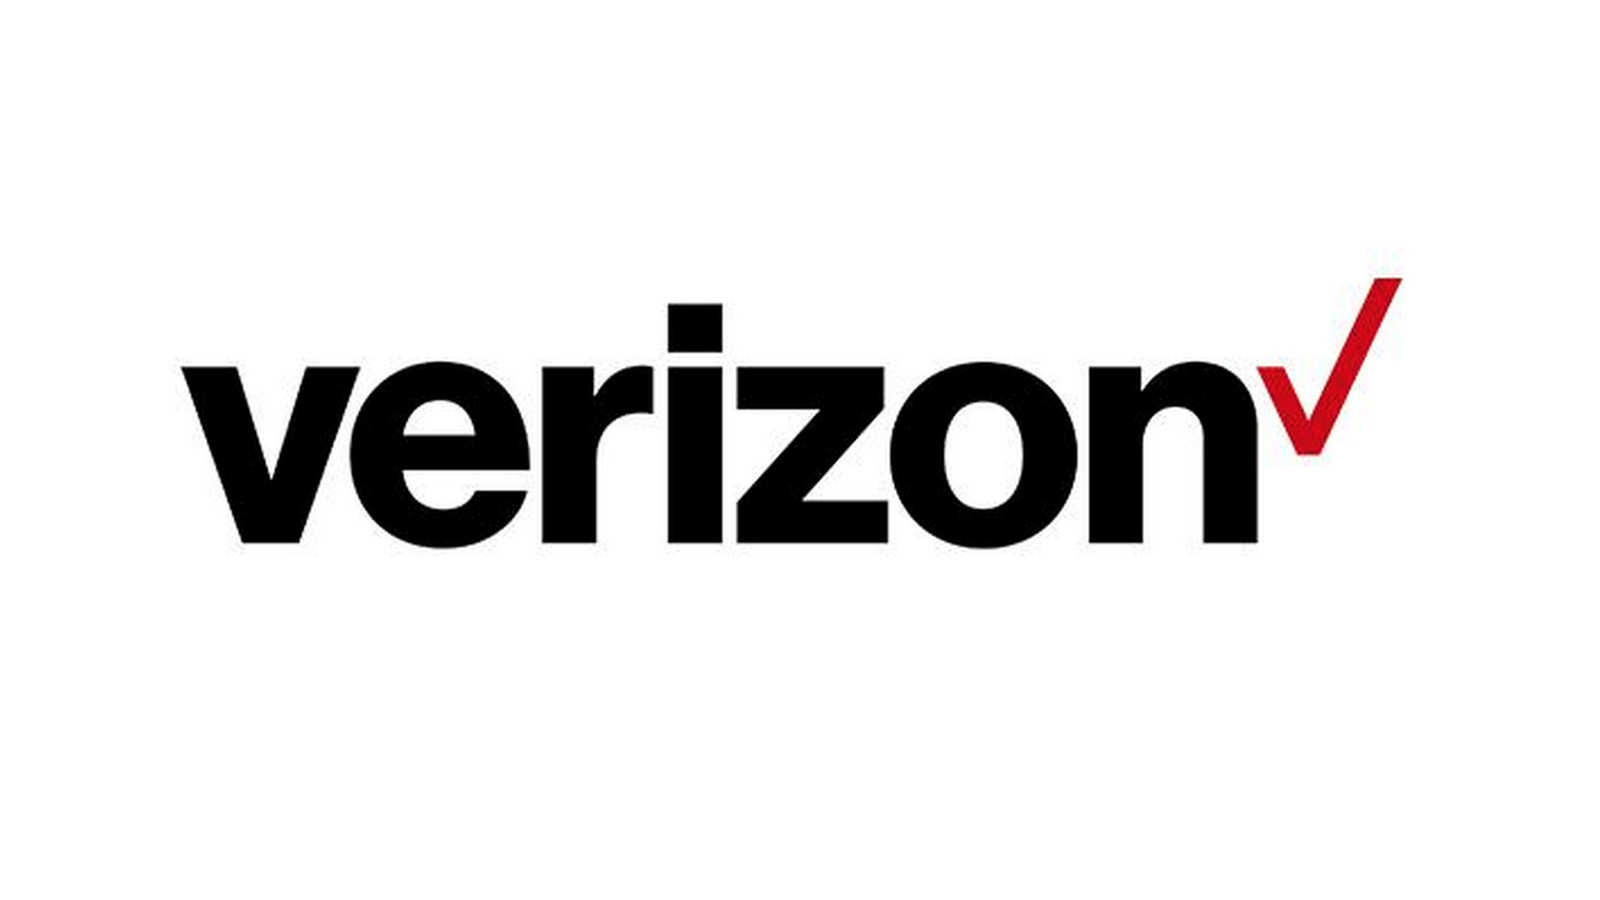 Verizon is planning to sell Yahoo and AOL for approximately $4 billion each.